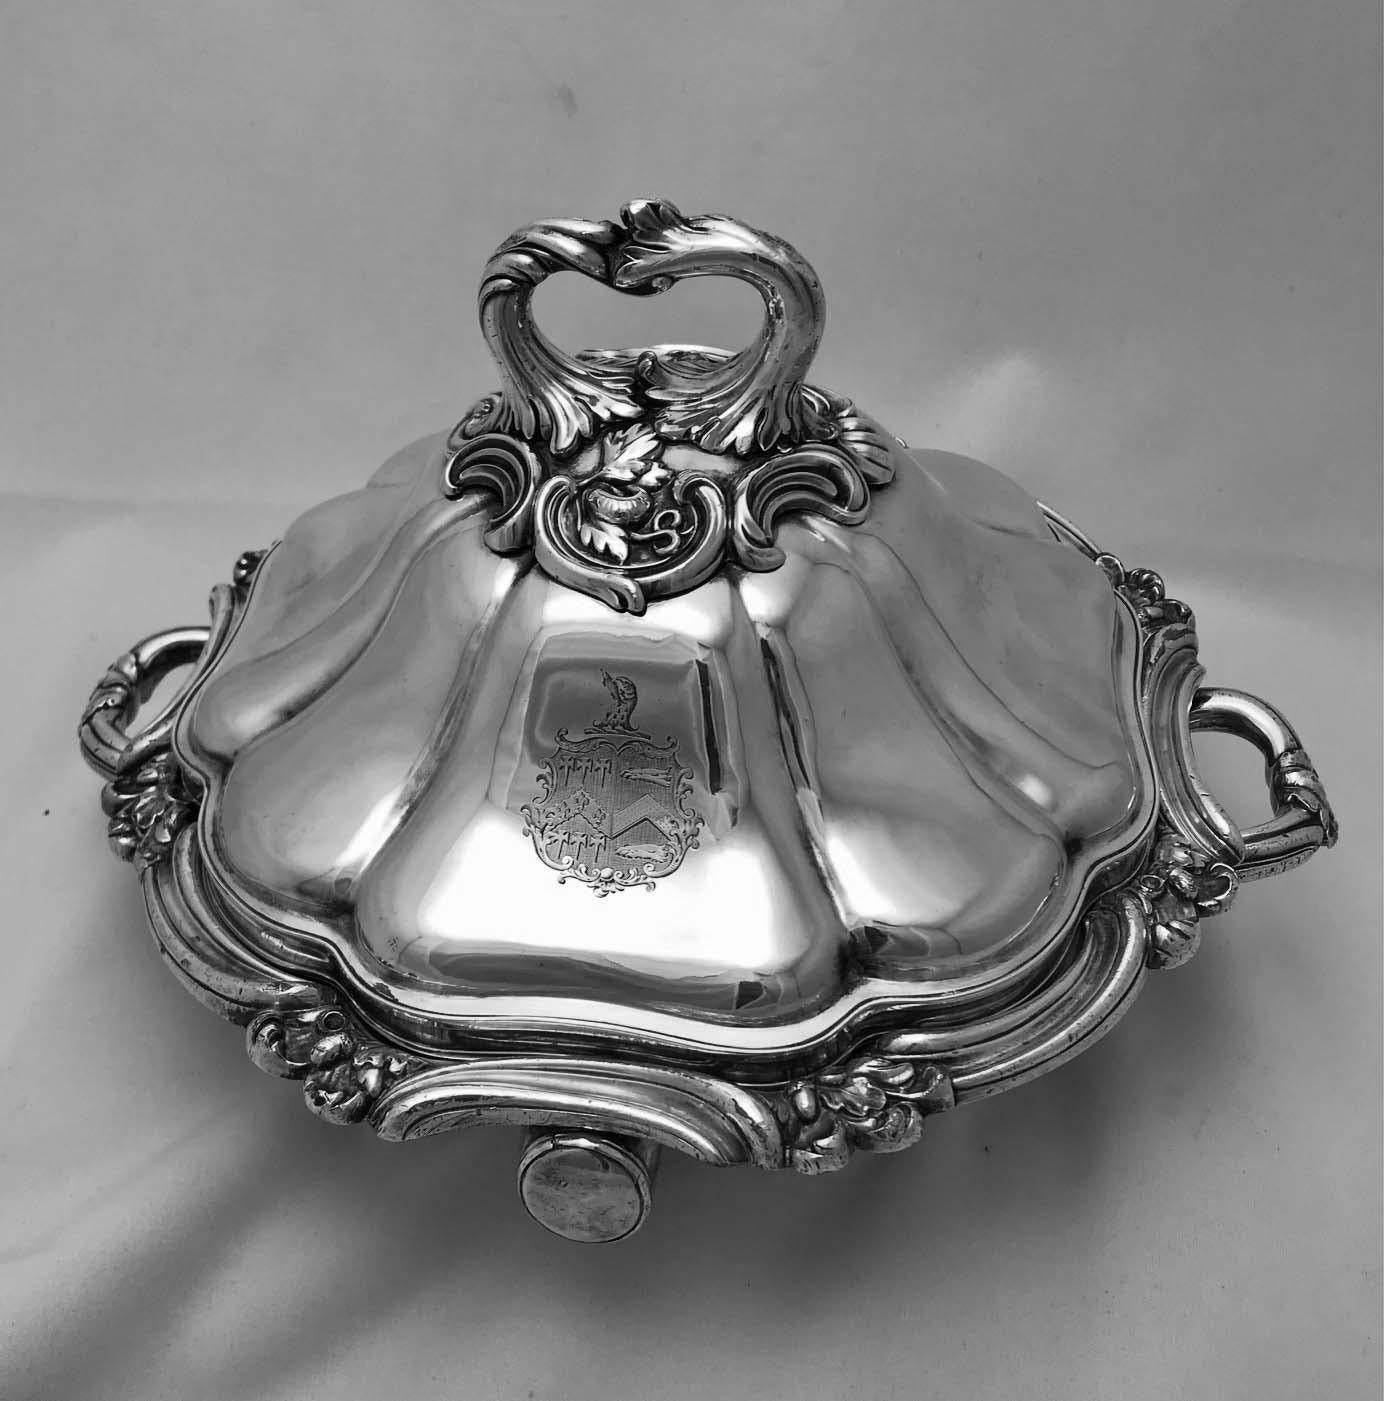 Hand-Crafted Victorian Covered Plated Chafing Dish with Armorial For Sale